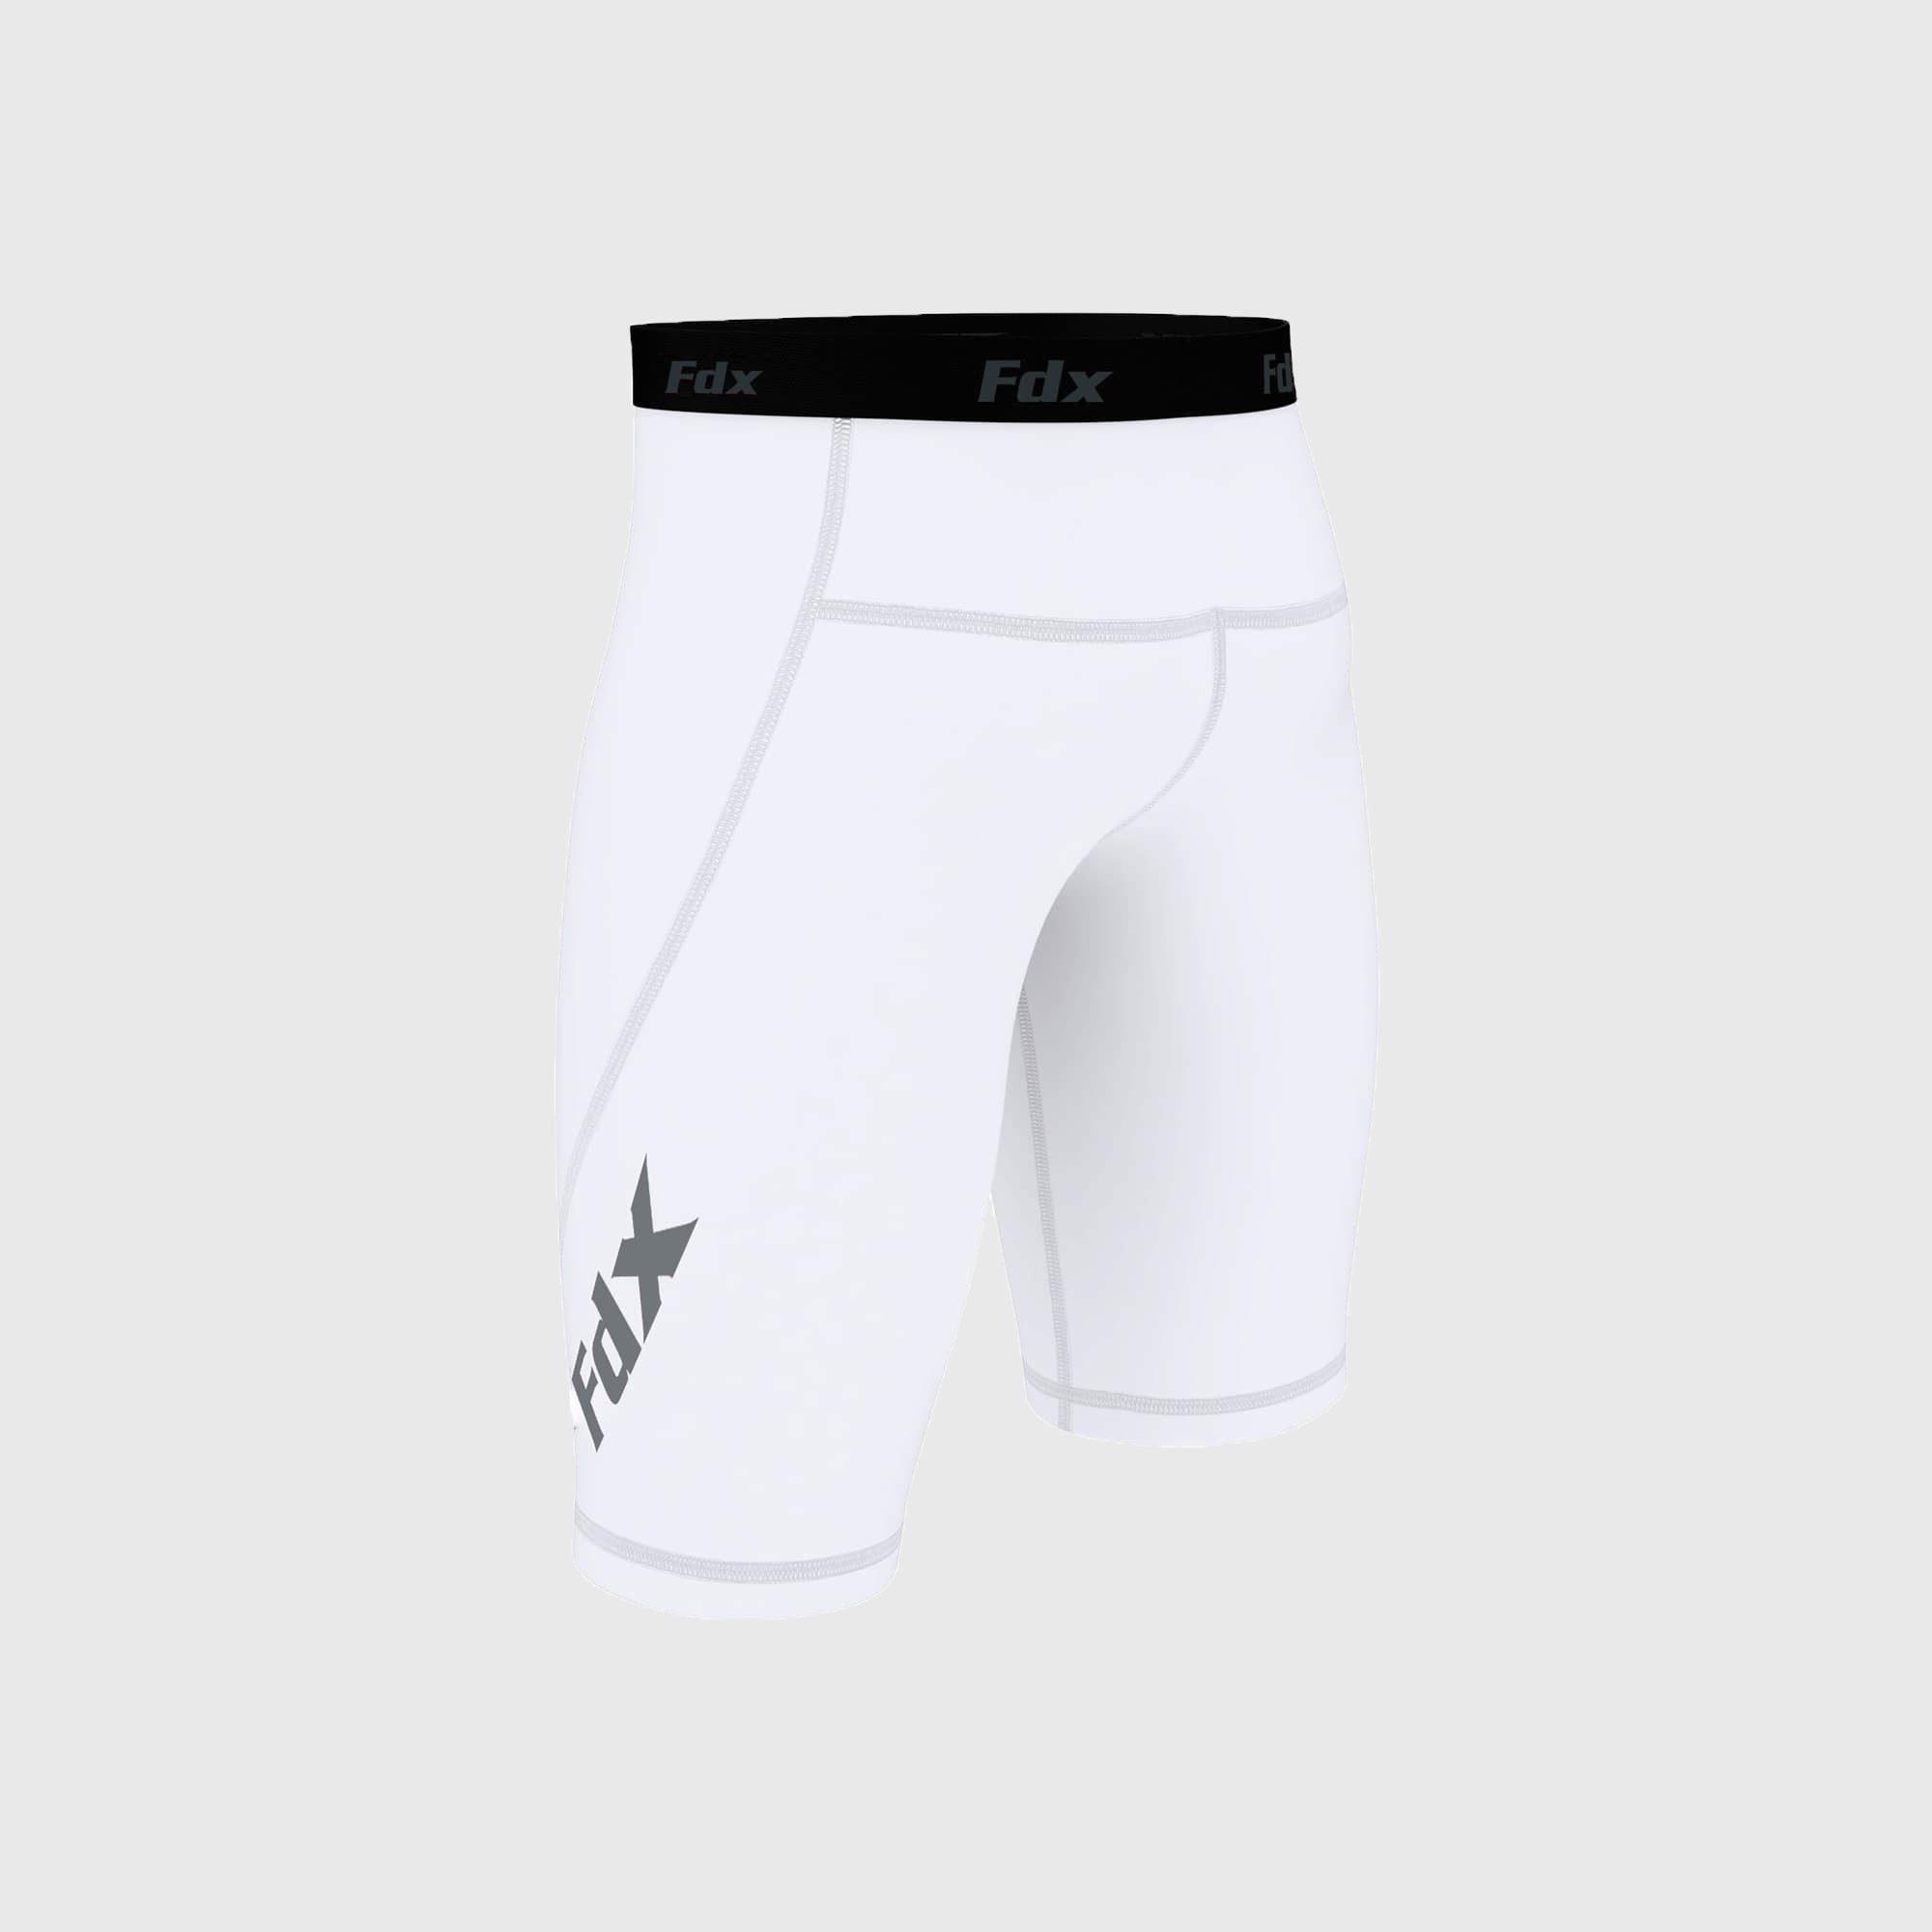 Fdx Mens White Compression Shorts Gym Workout Running Athletic Yoga Elastic Waistband Strechable Breathable